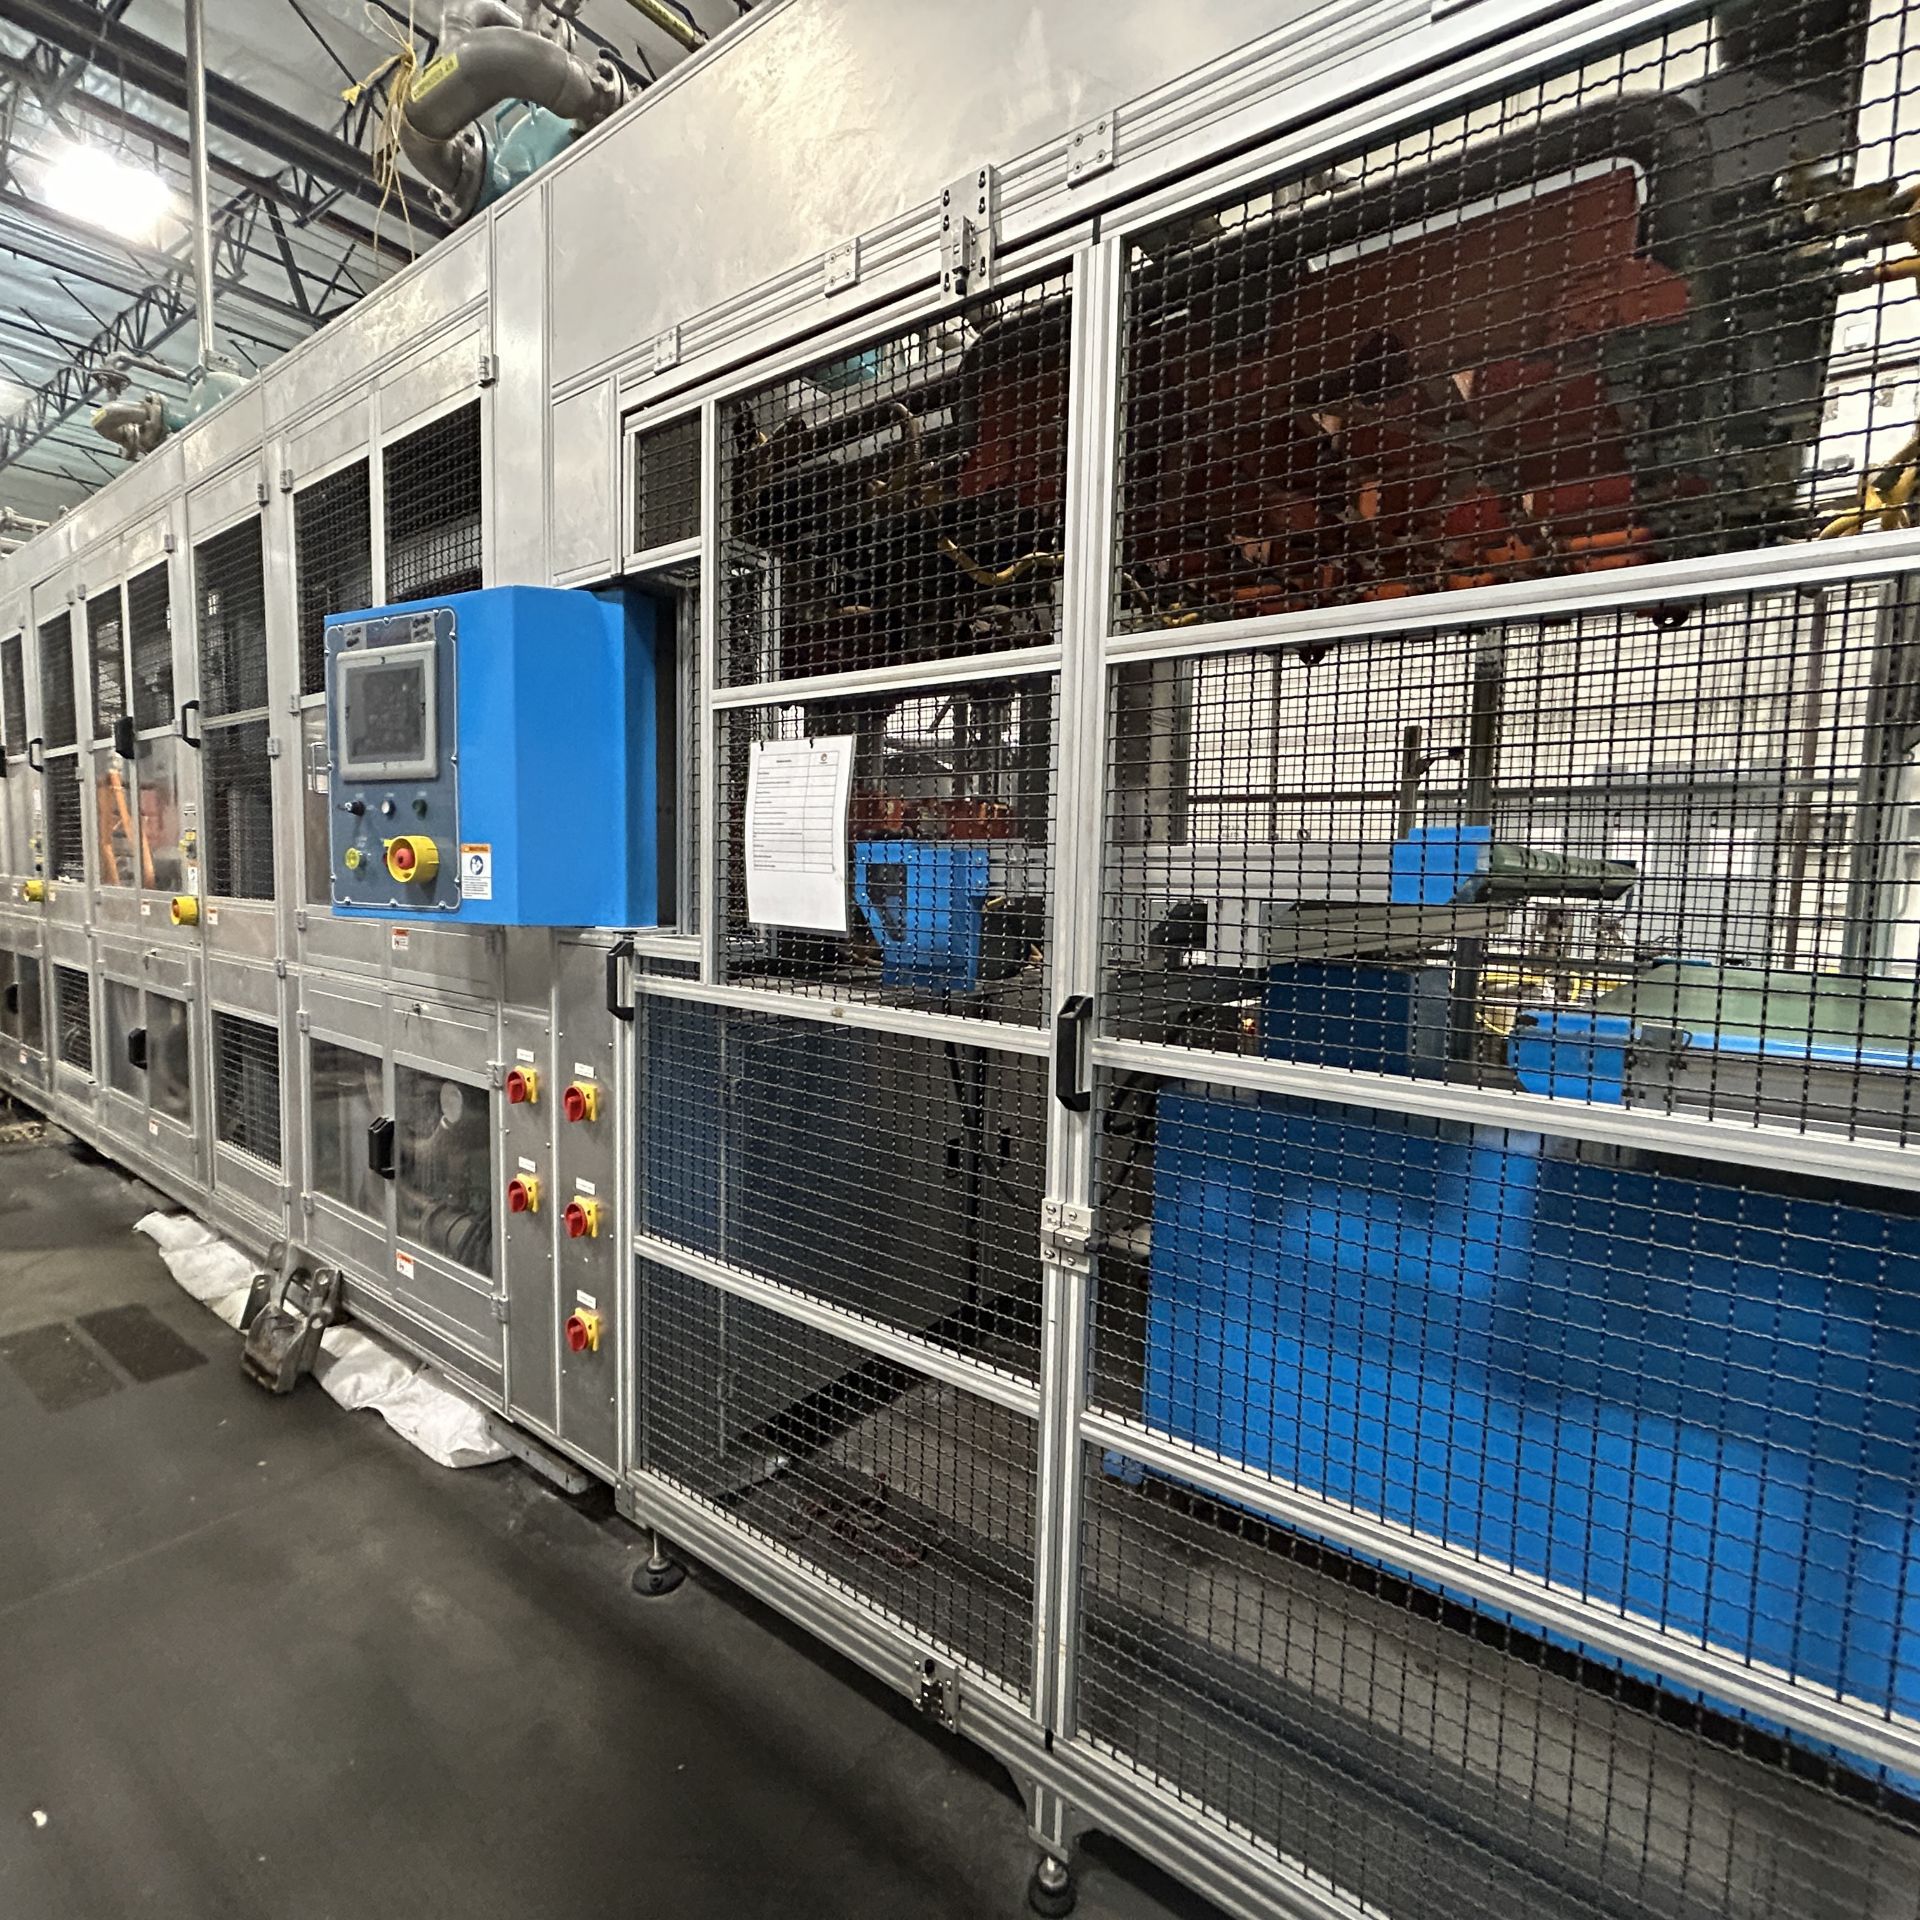 TPM-1500 3-Stage Pulp Thermoforming Machine Equipped With (1) 2018 TPM-AS-1500 2-Stage Auto Stacker - Image 6 of 39